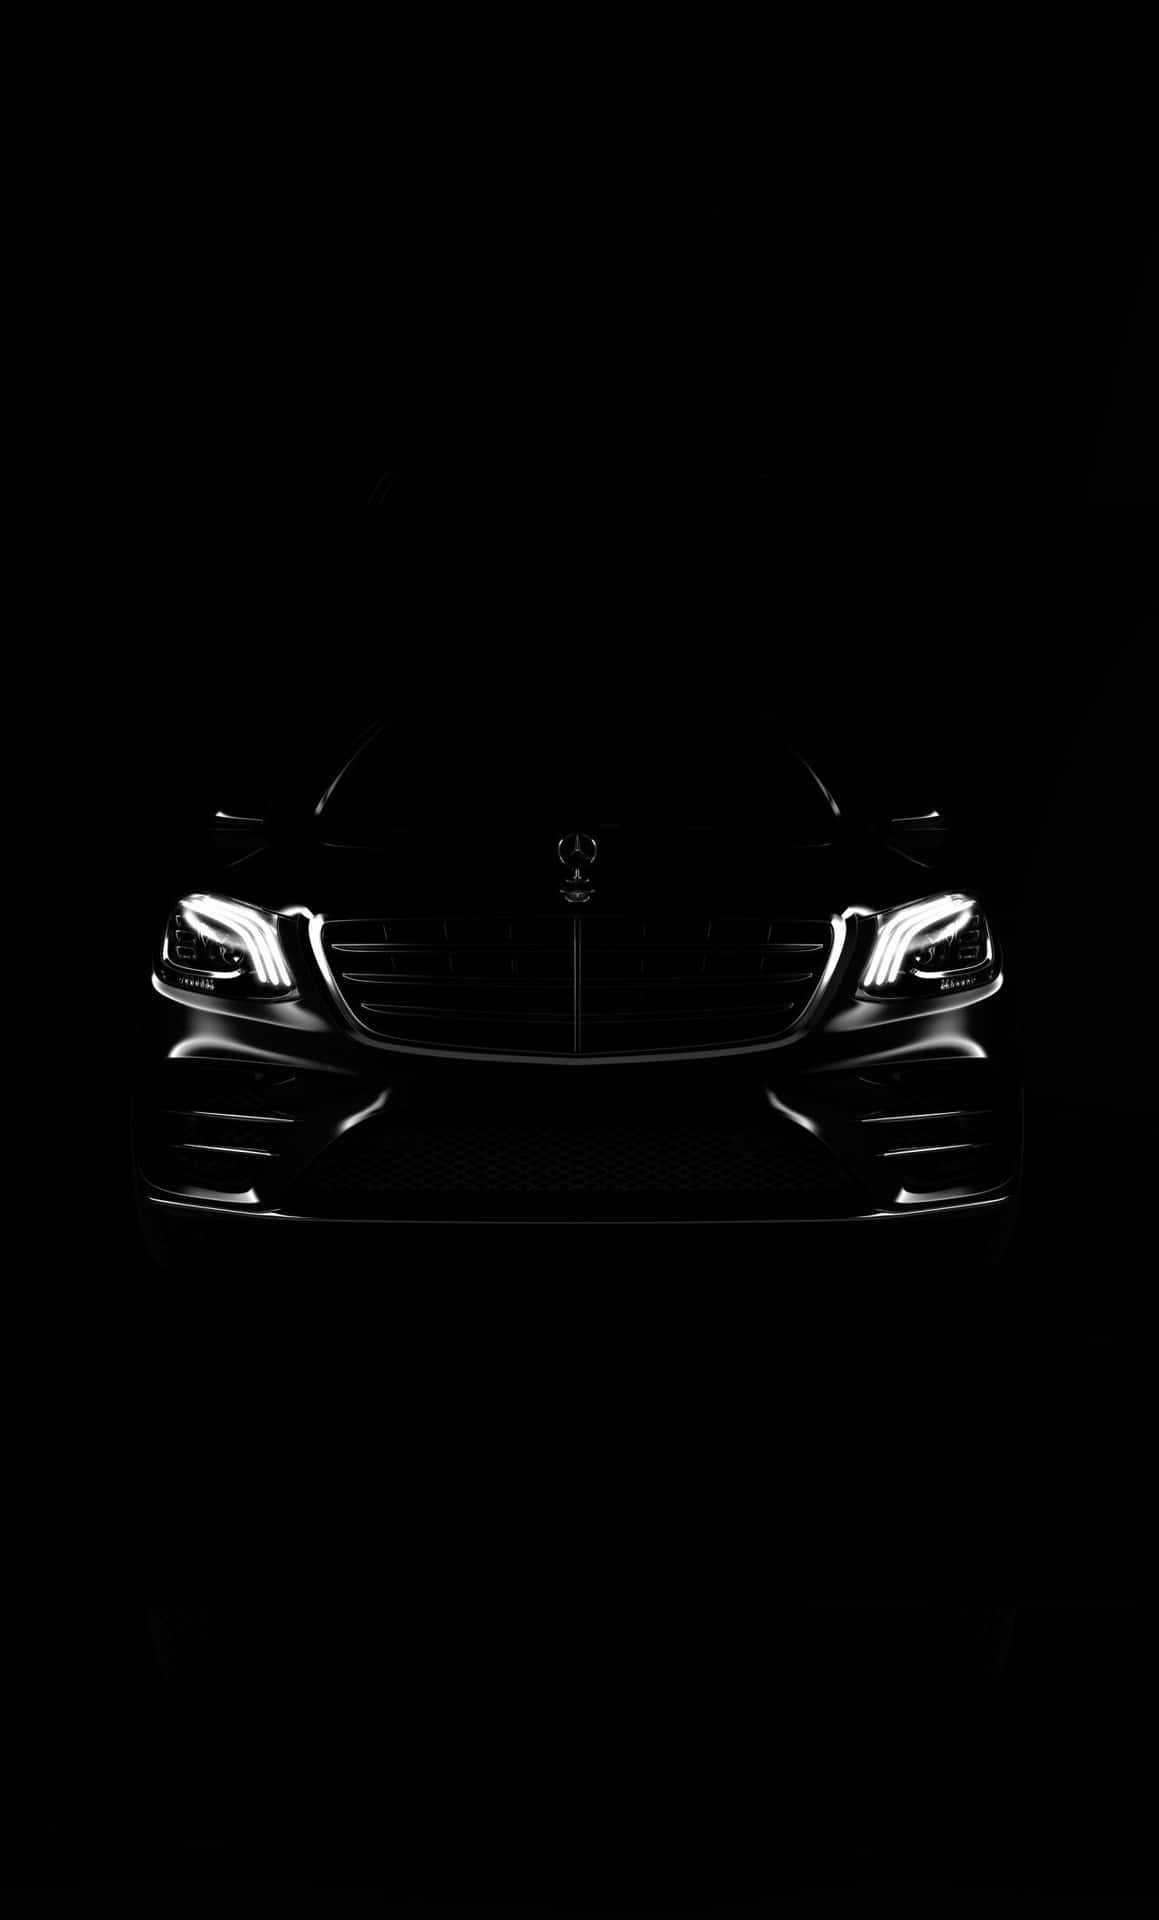 Best Mercedes Background All Black Mercedes In The Shadows